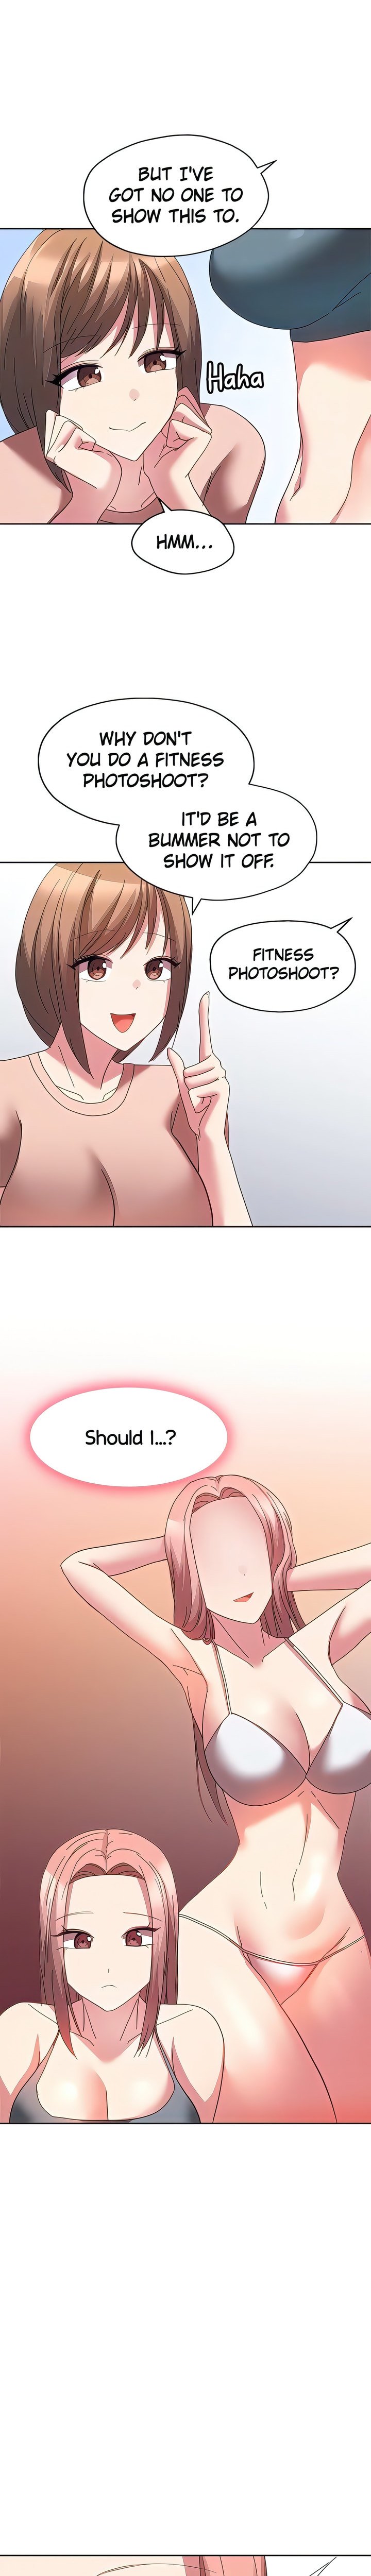 girls-i-used-to-teach-chap-34-18